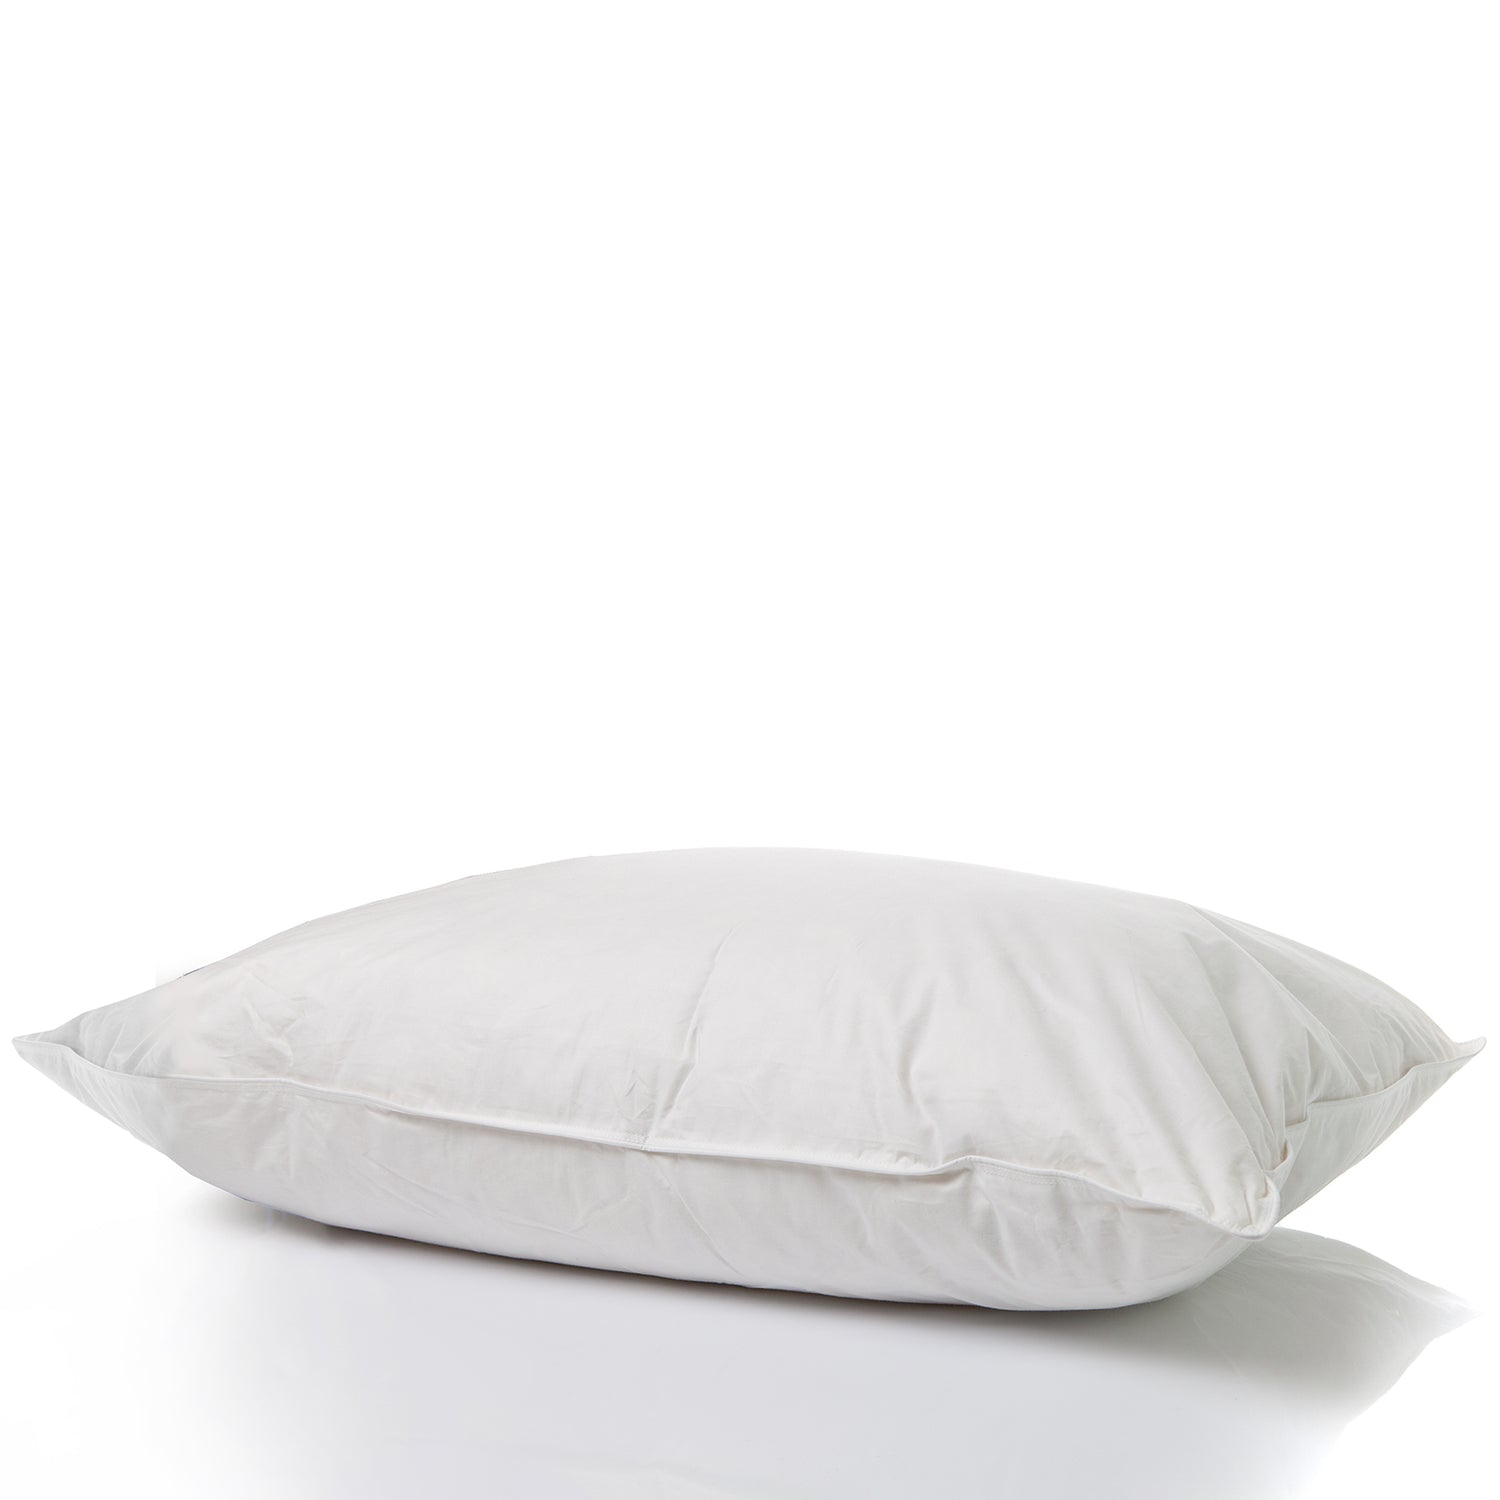 Casa Decor 50% Duck Feather 50% Down Pillow Cotton Cover 1000GSM Twin Pack-Bedding-PEROZ Accessories